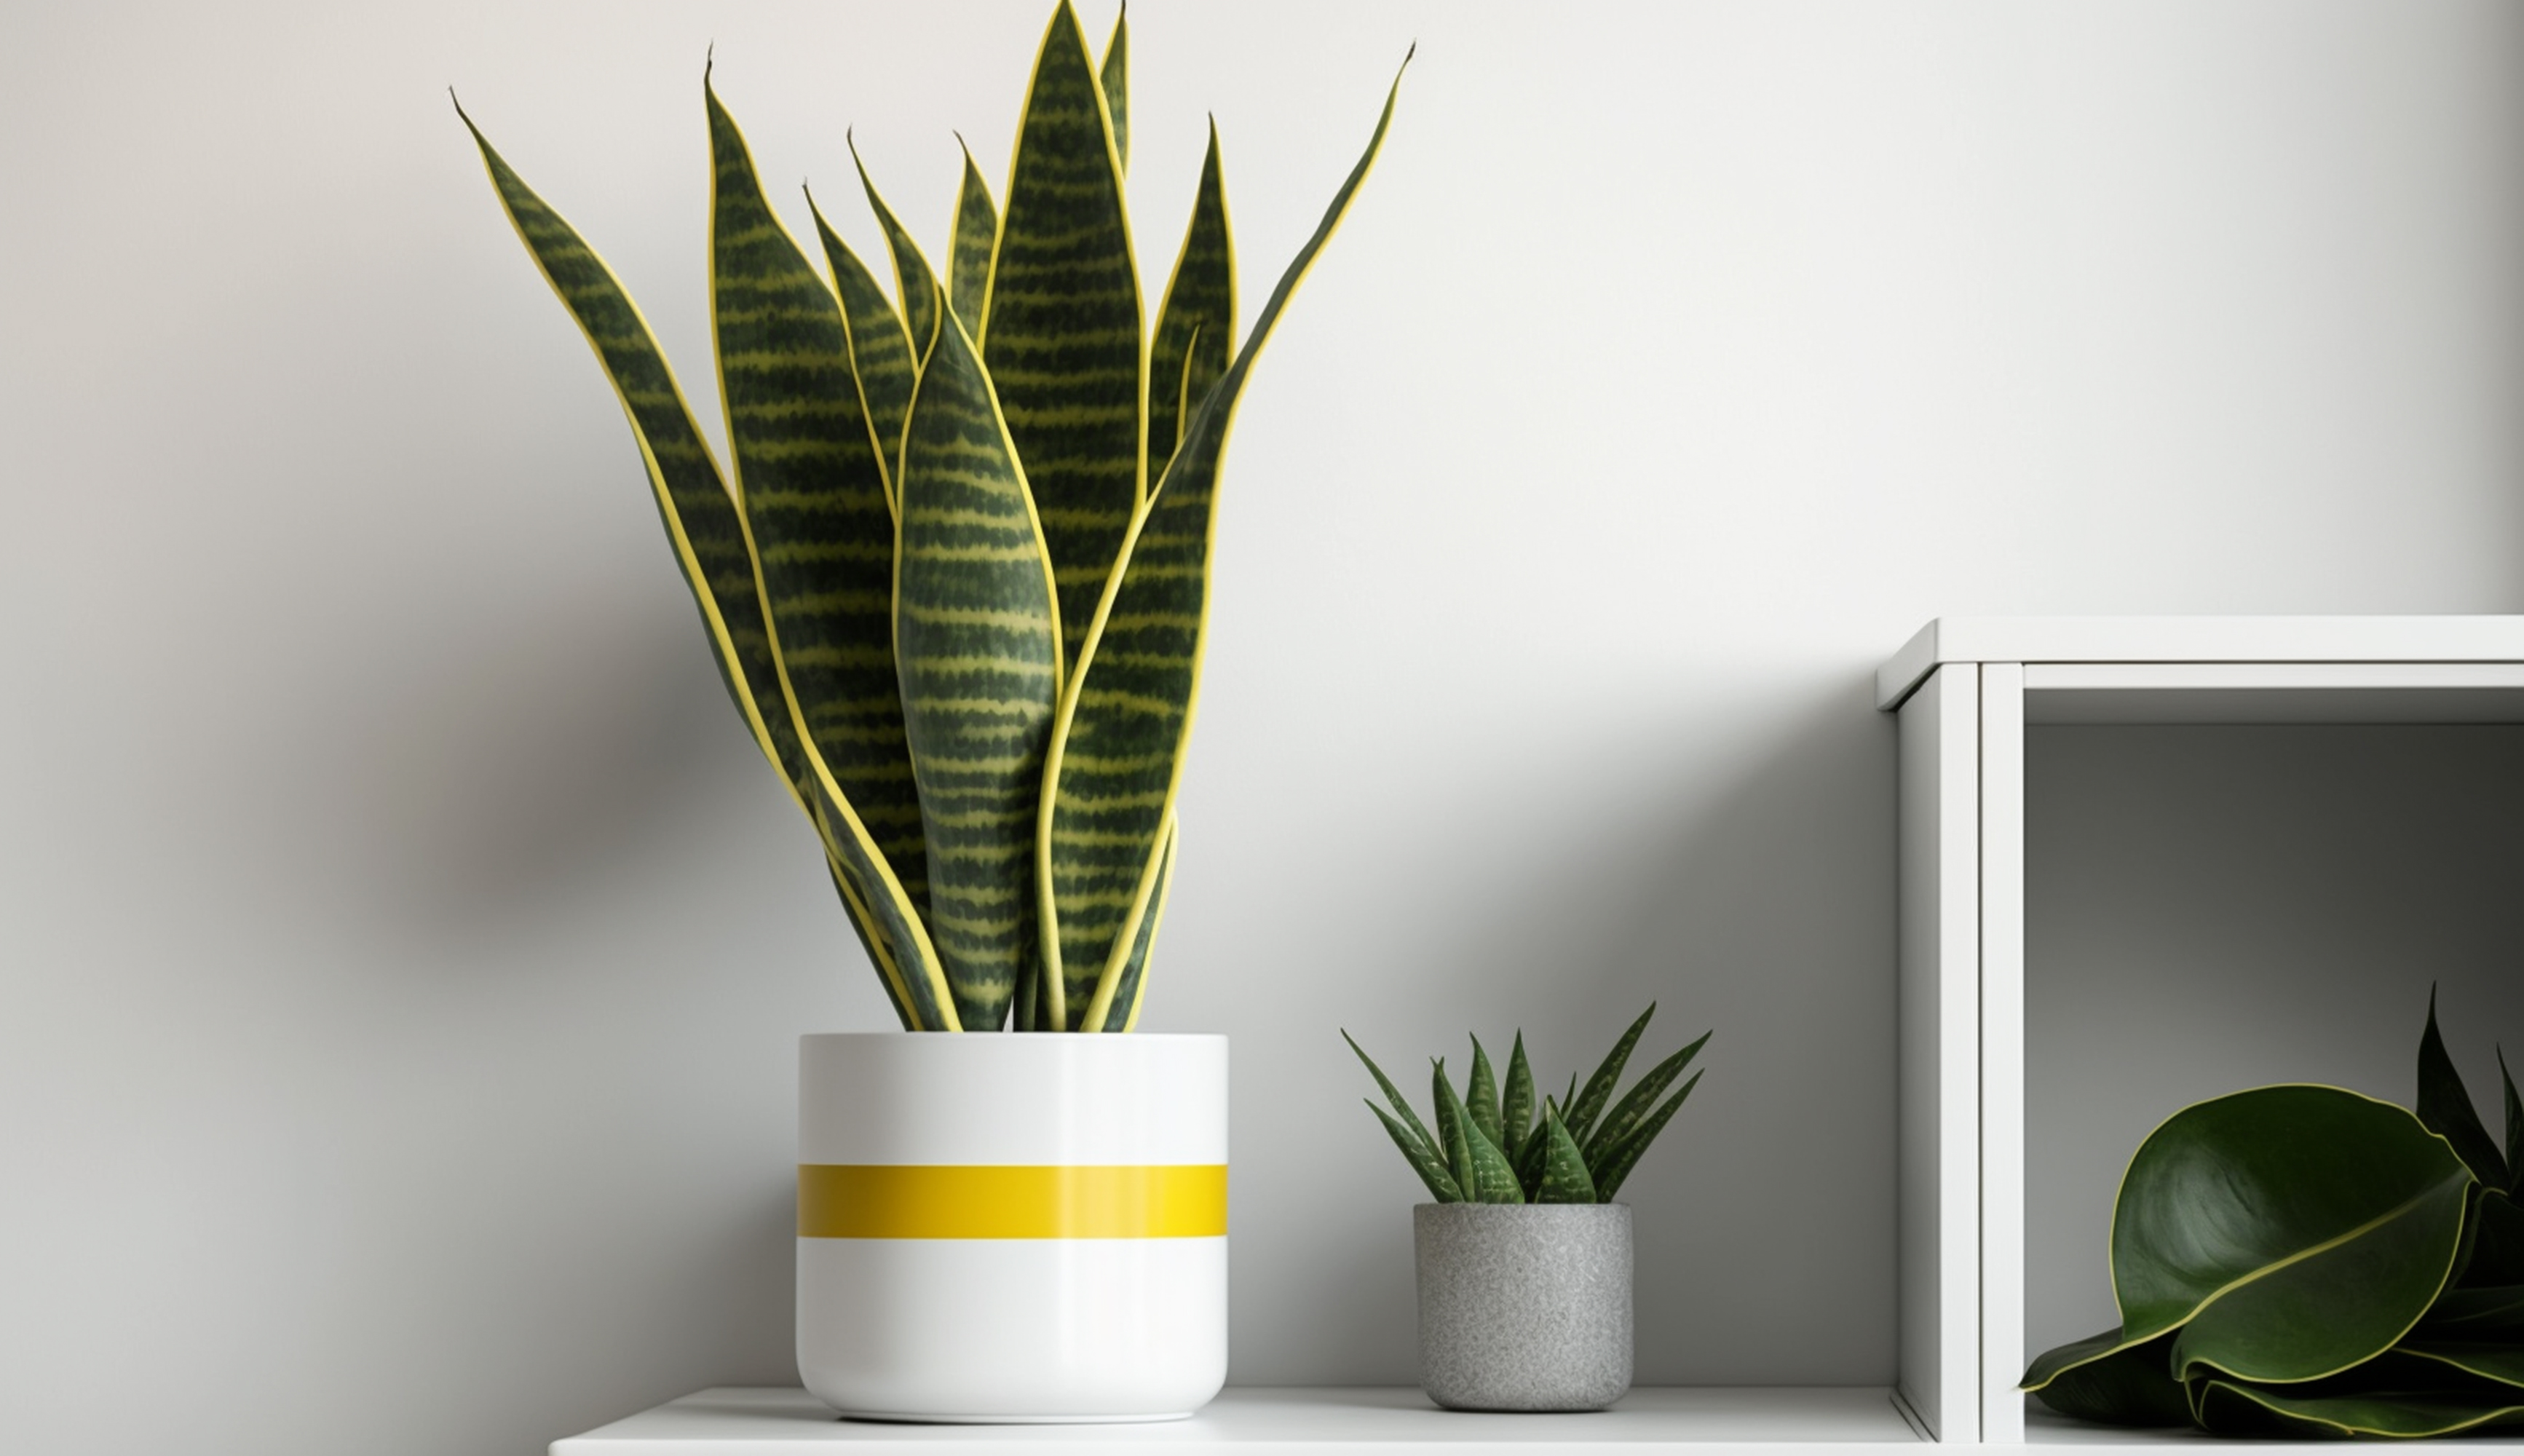 Snake Plant: Hardy indoor greenery with tall, stiff leaves, known for air-purifying qualities. A resilient and stylish addition to bedroom decor